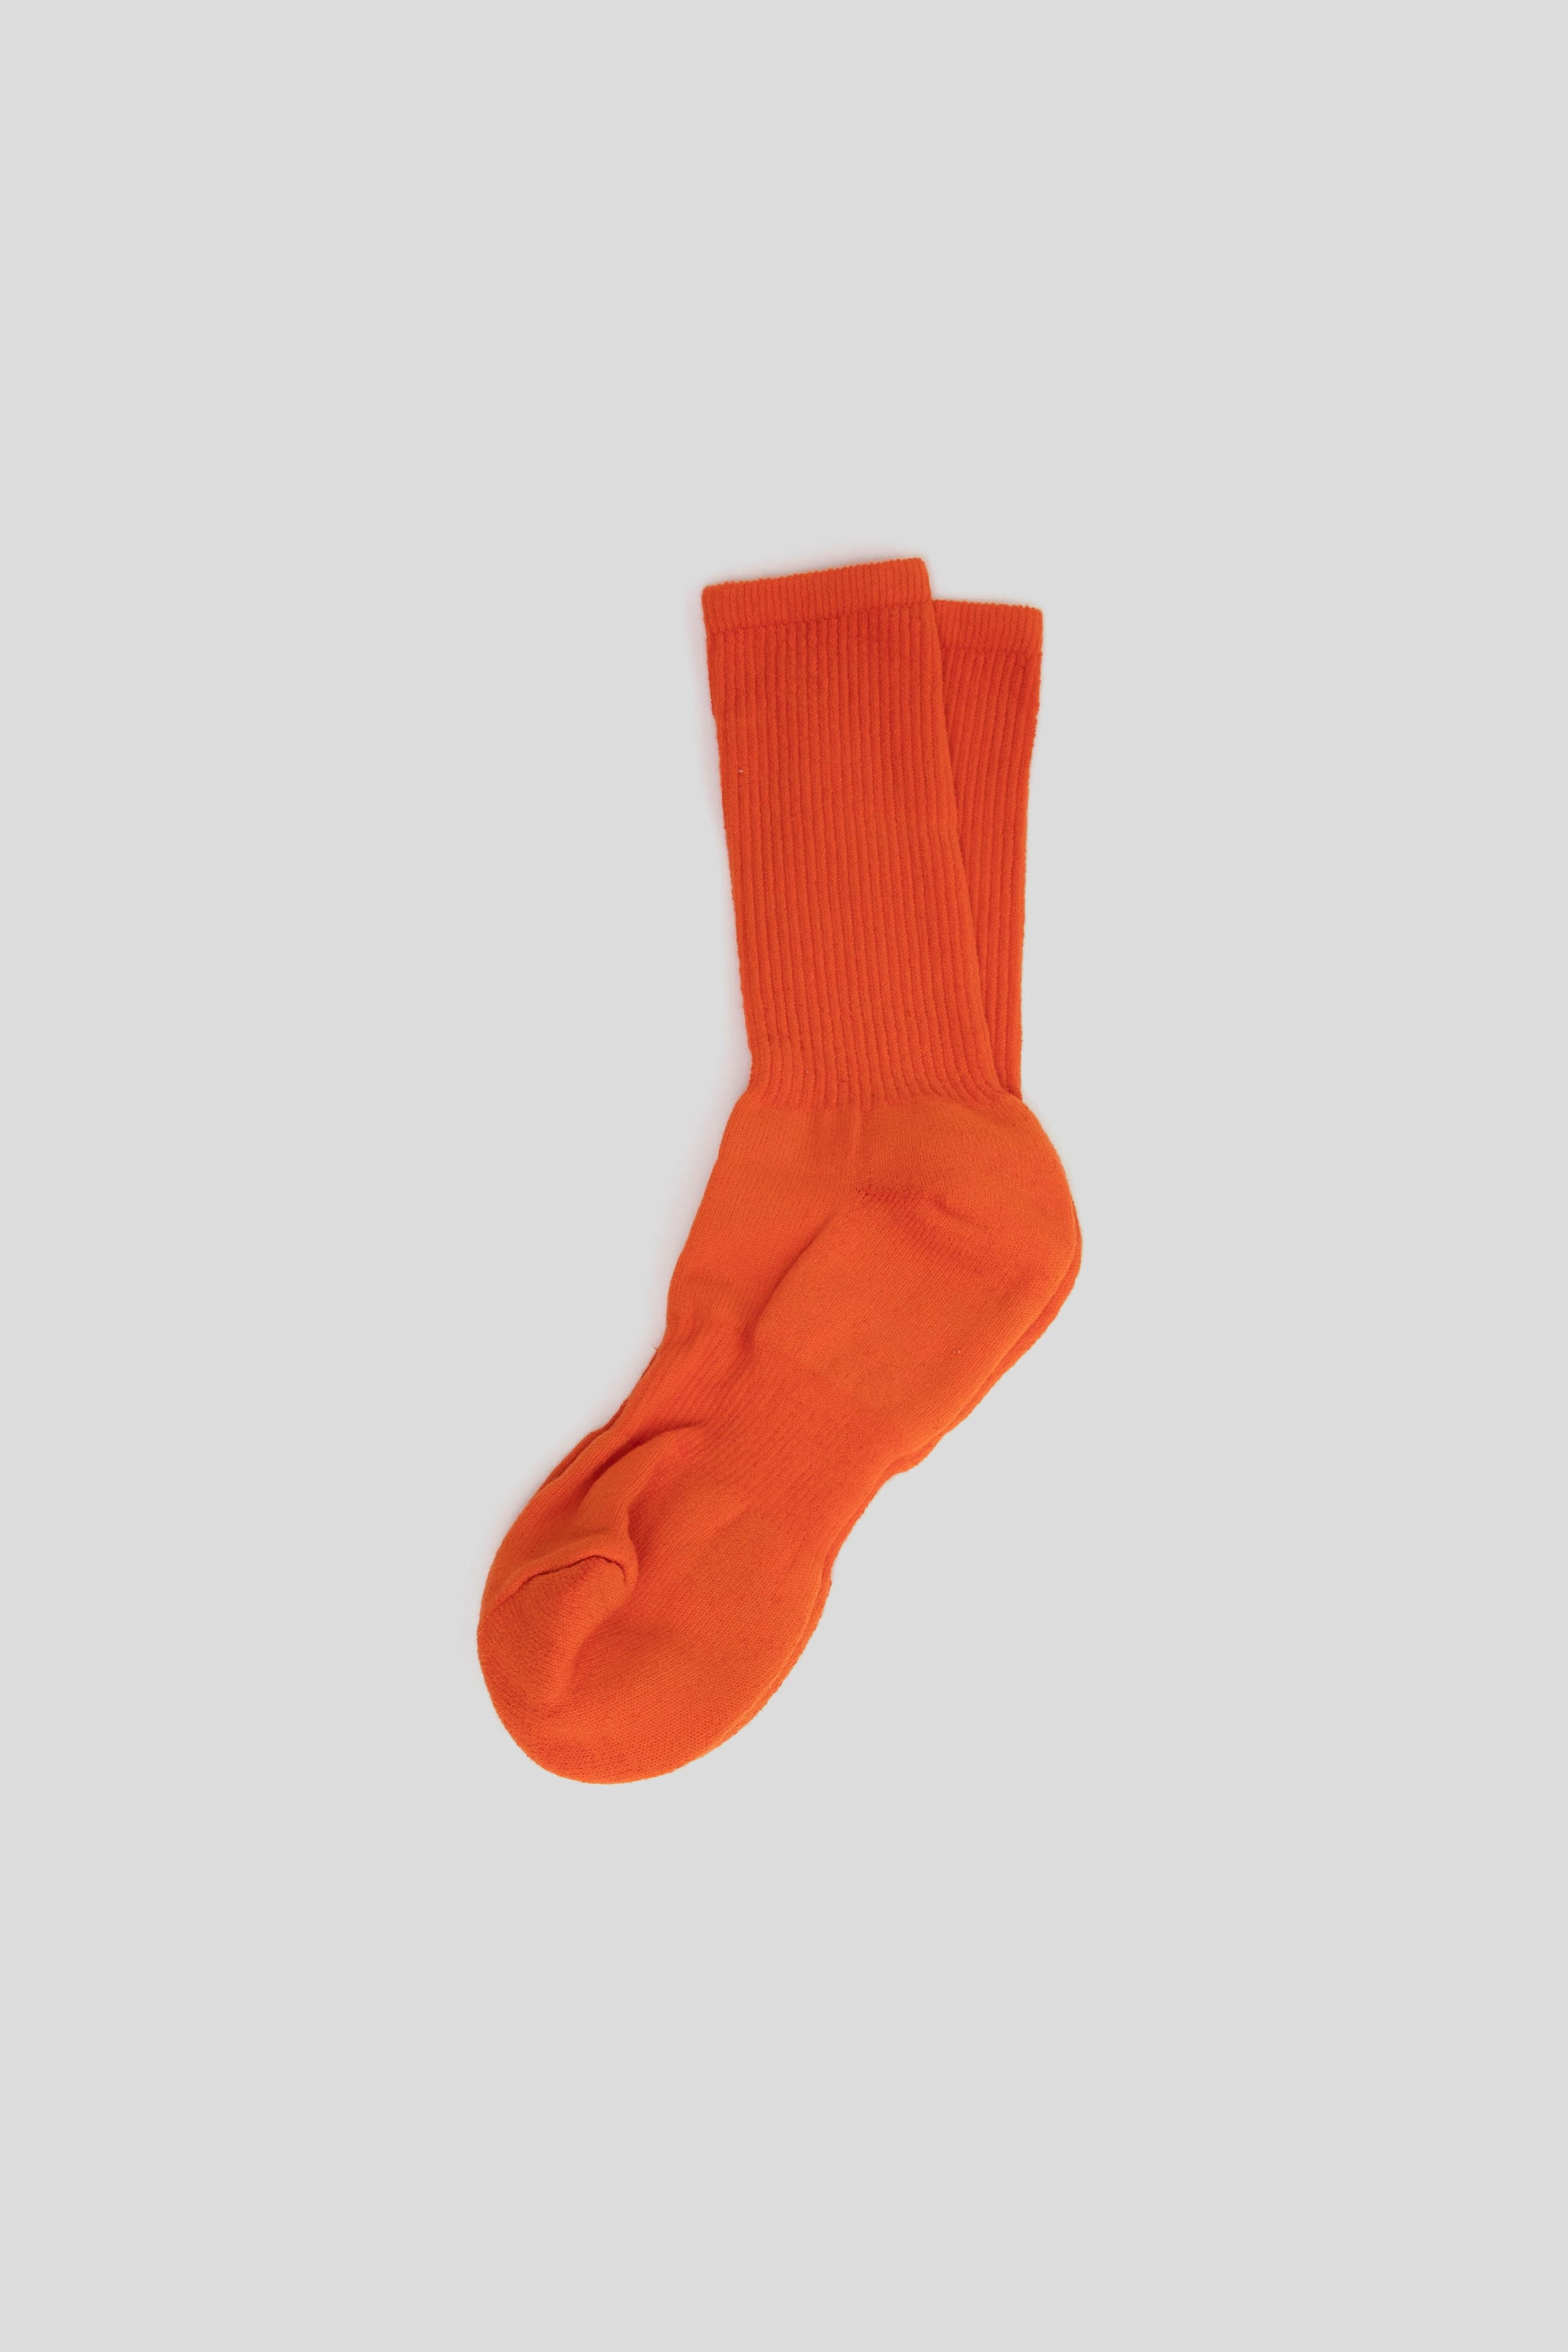 American Trench Mil-Spec Socks in Orange | Wallace Mercantile Shop